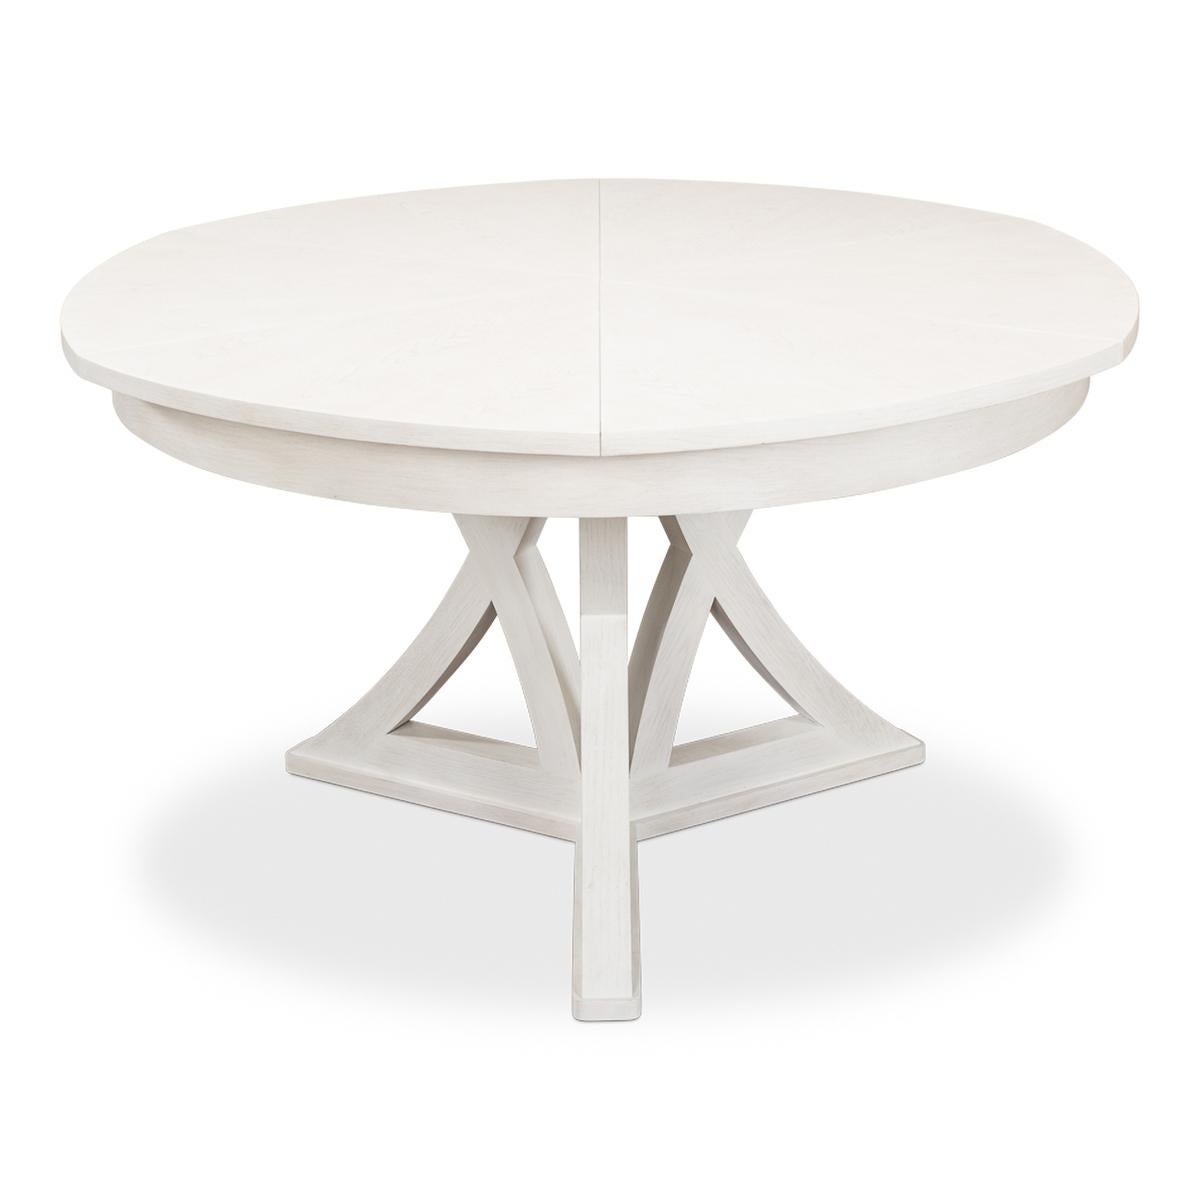 Wood Rustic Round Dining Table, Working White For Sale